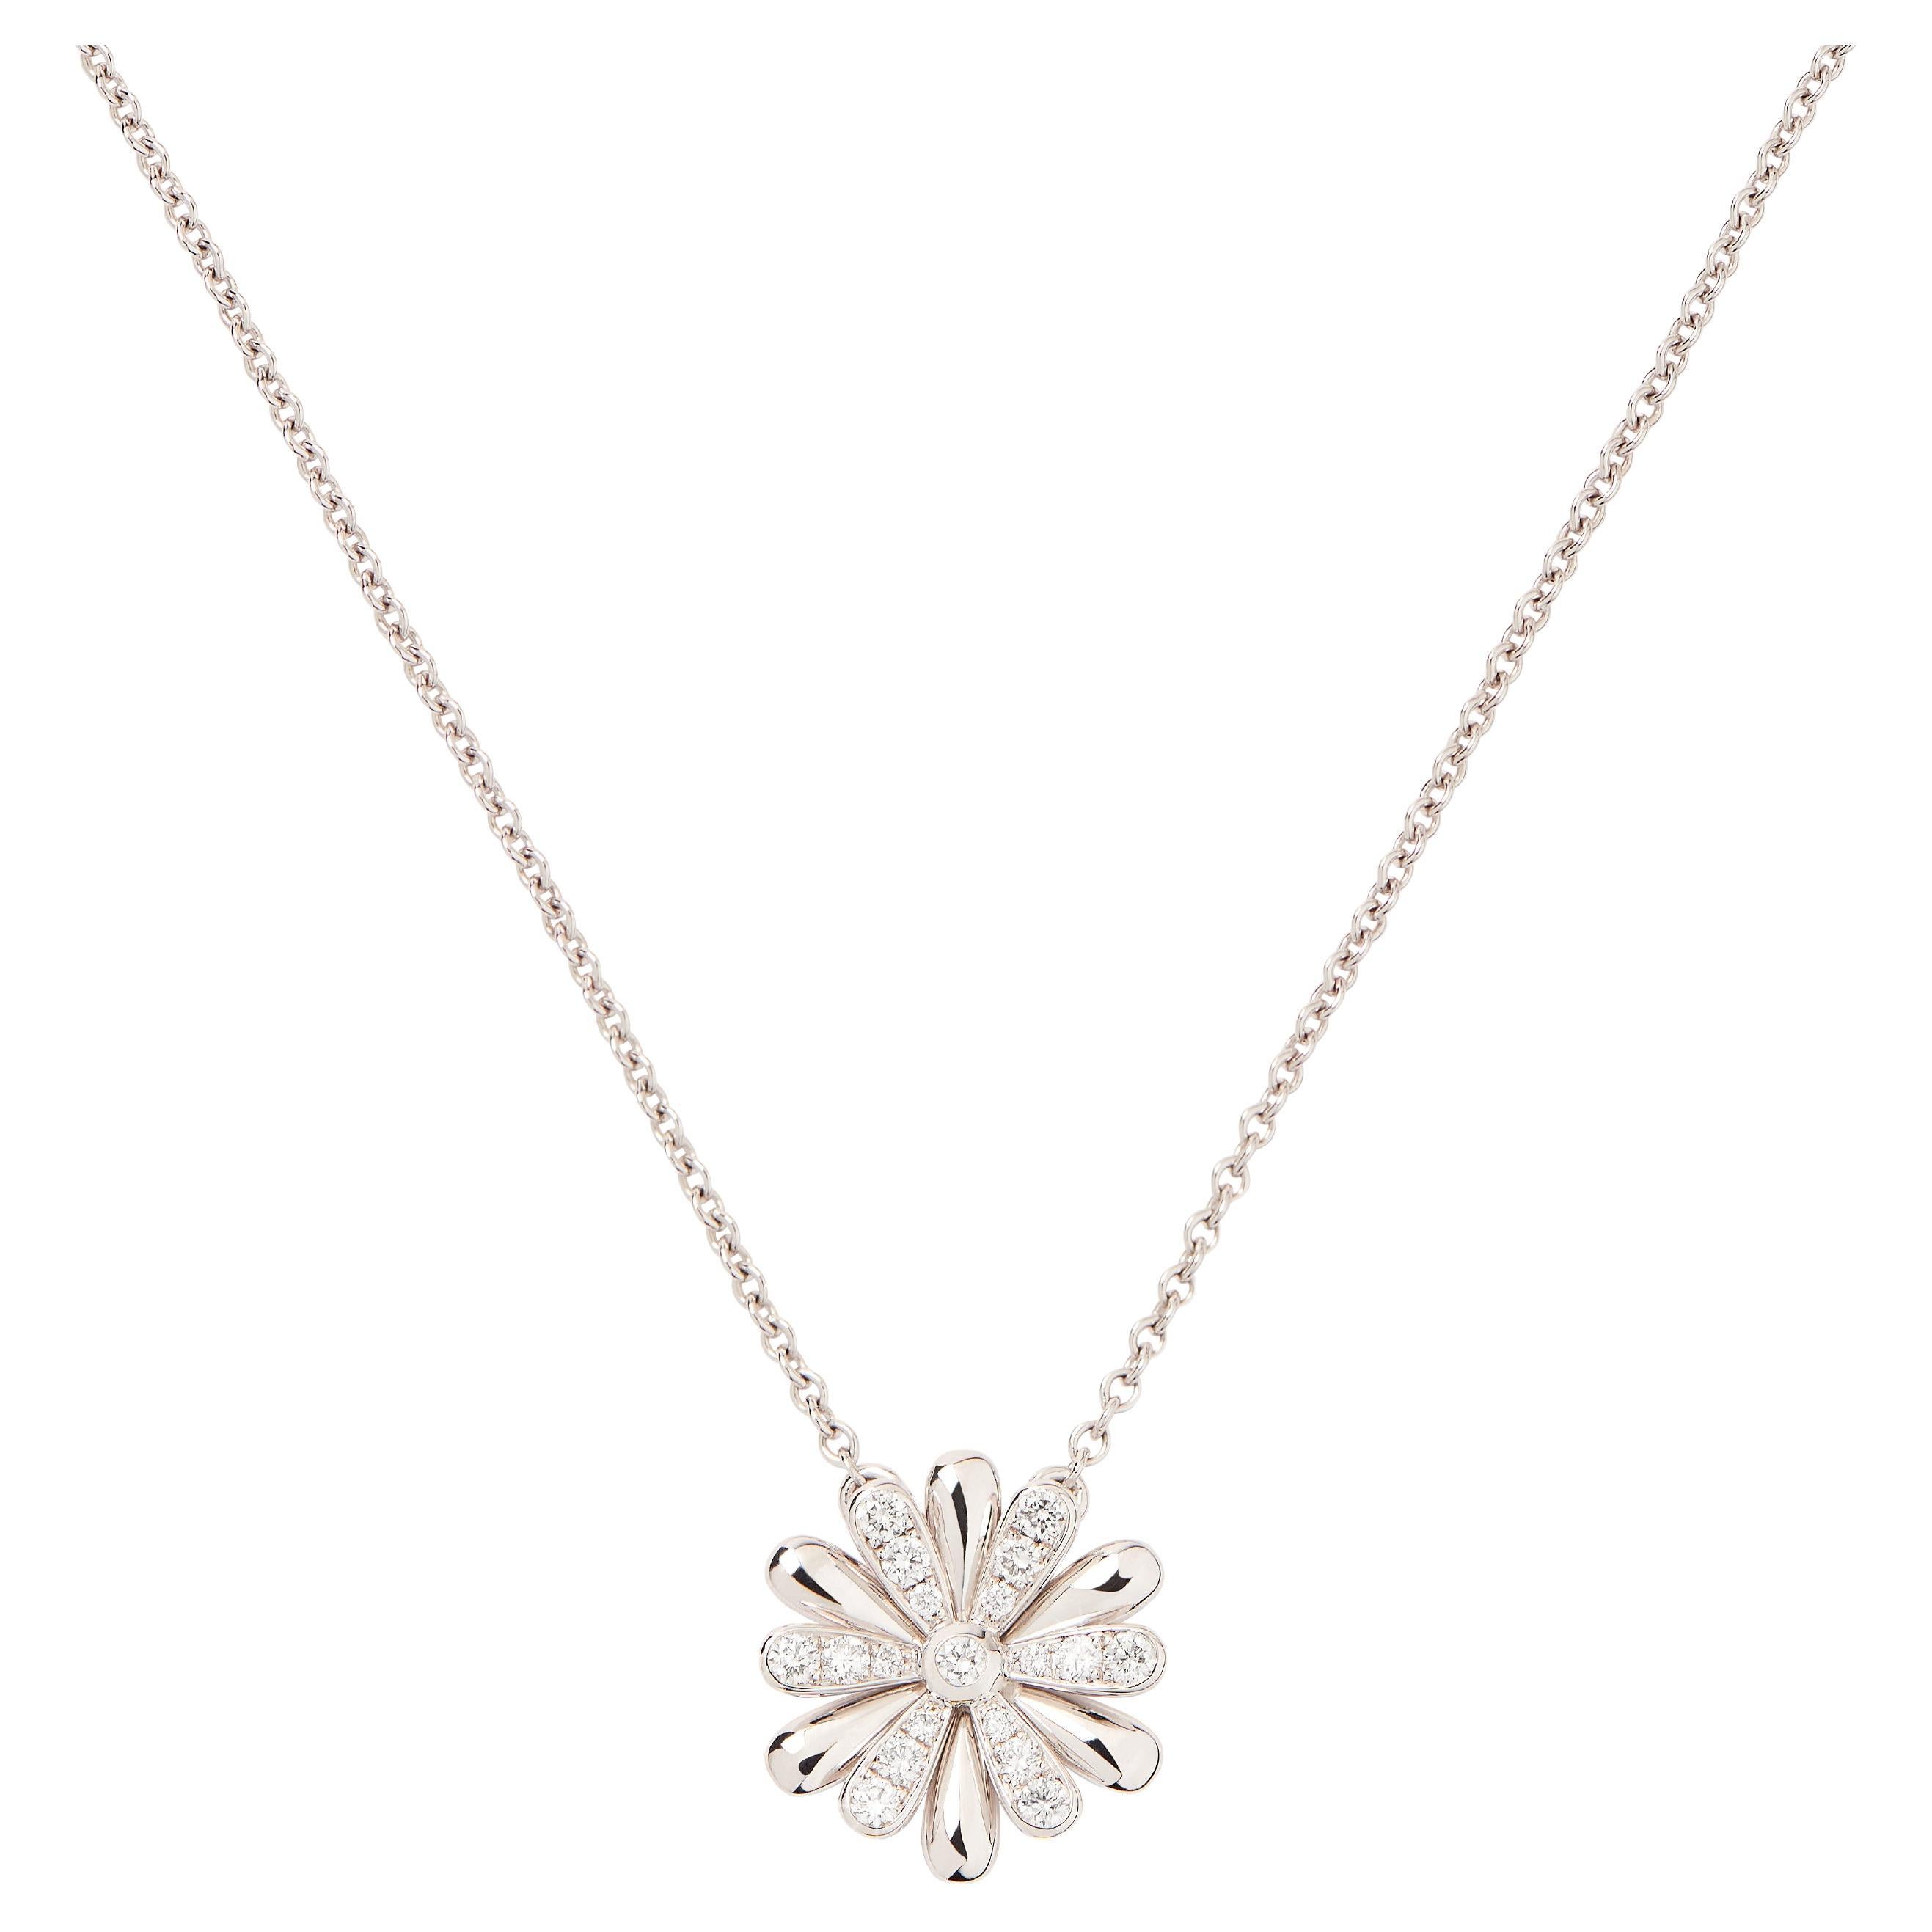 18 Carat White Gold necklace, Diamonds, Flower Collection